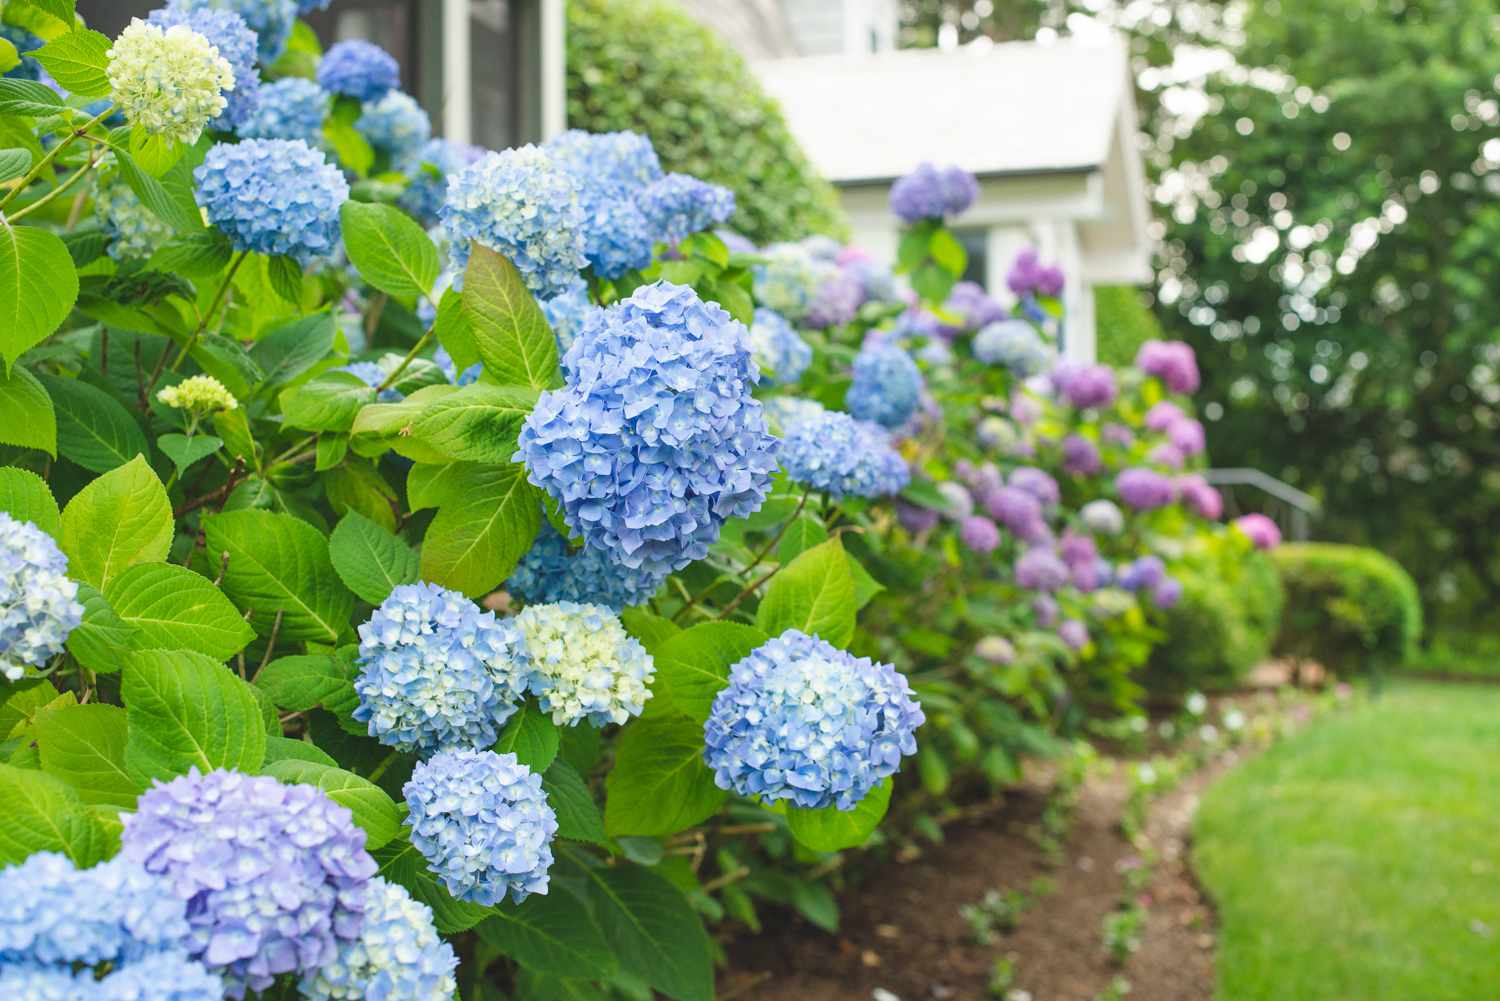 Optimal Watering Schedule For A One Yard Tall Hydrangea Bush: How Much Water Is Needed And When To Water